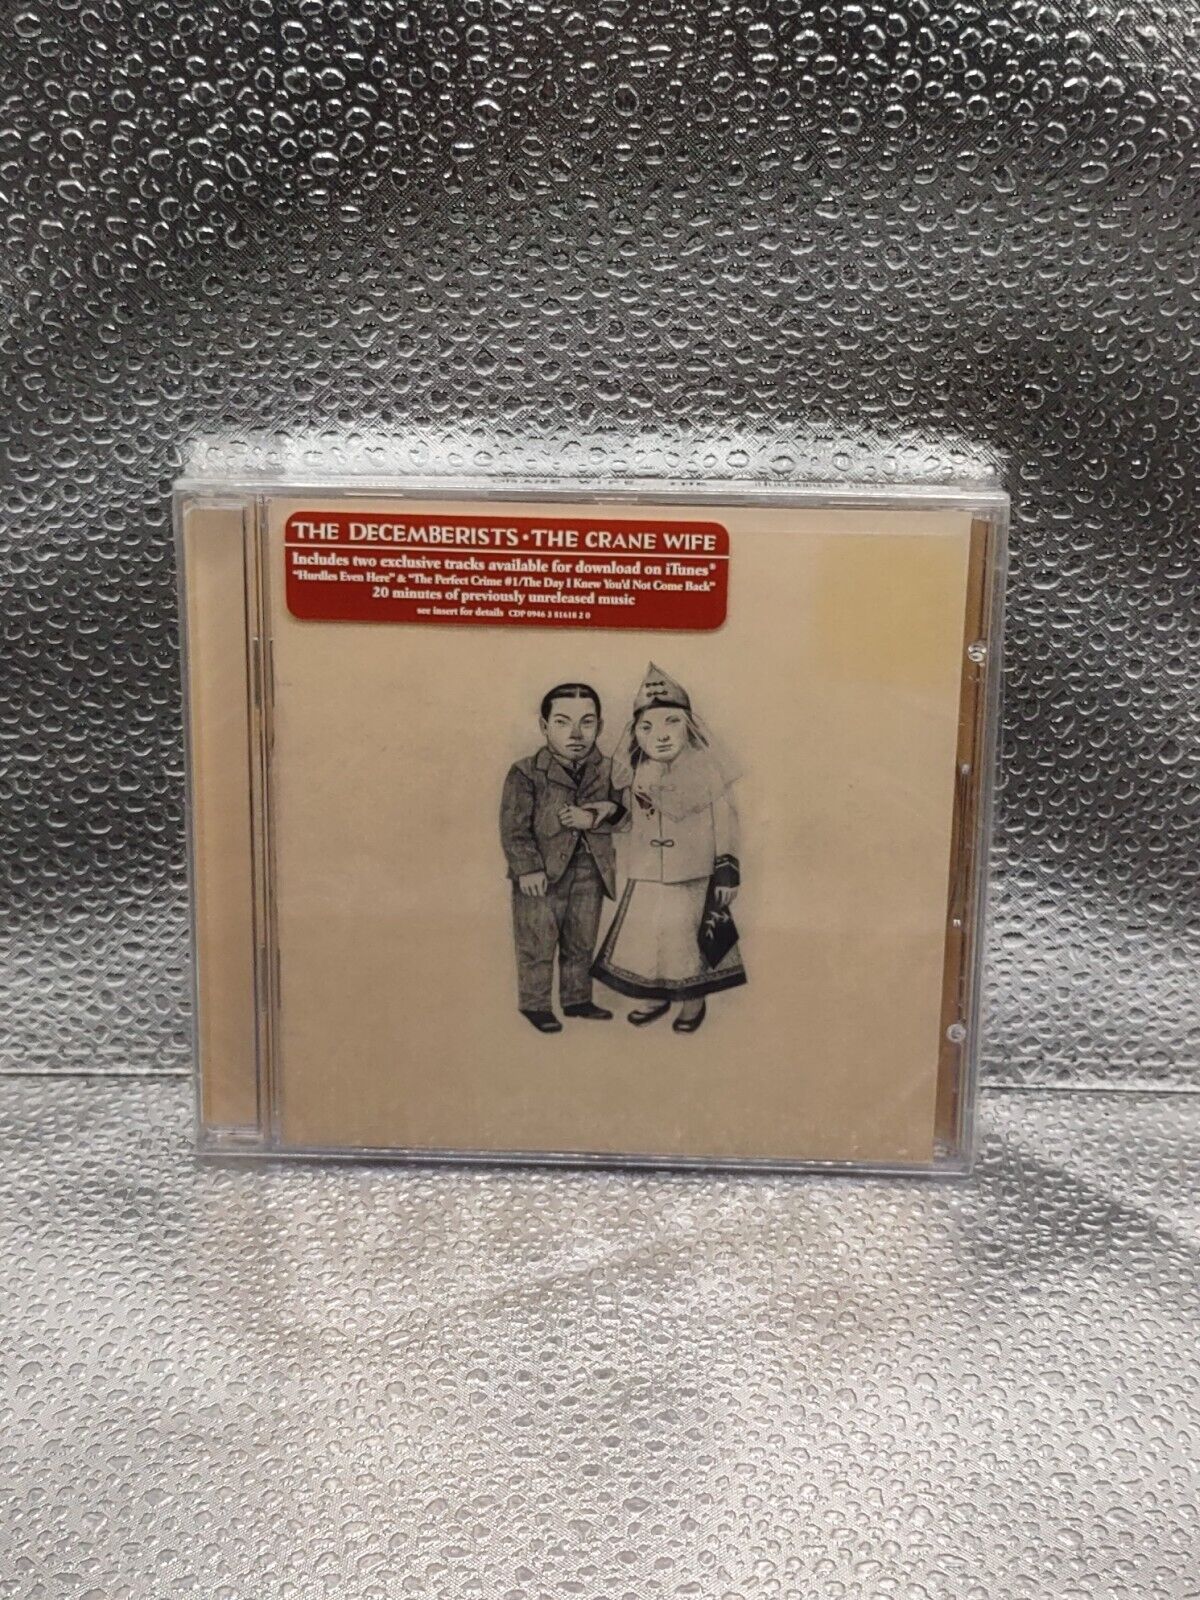 The Crane Wife by The Decemberists (CD, 2006) New Sealed